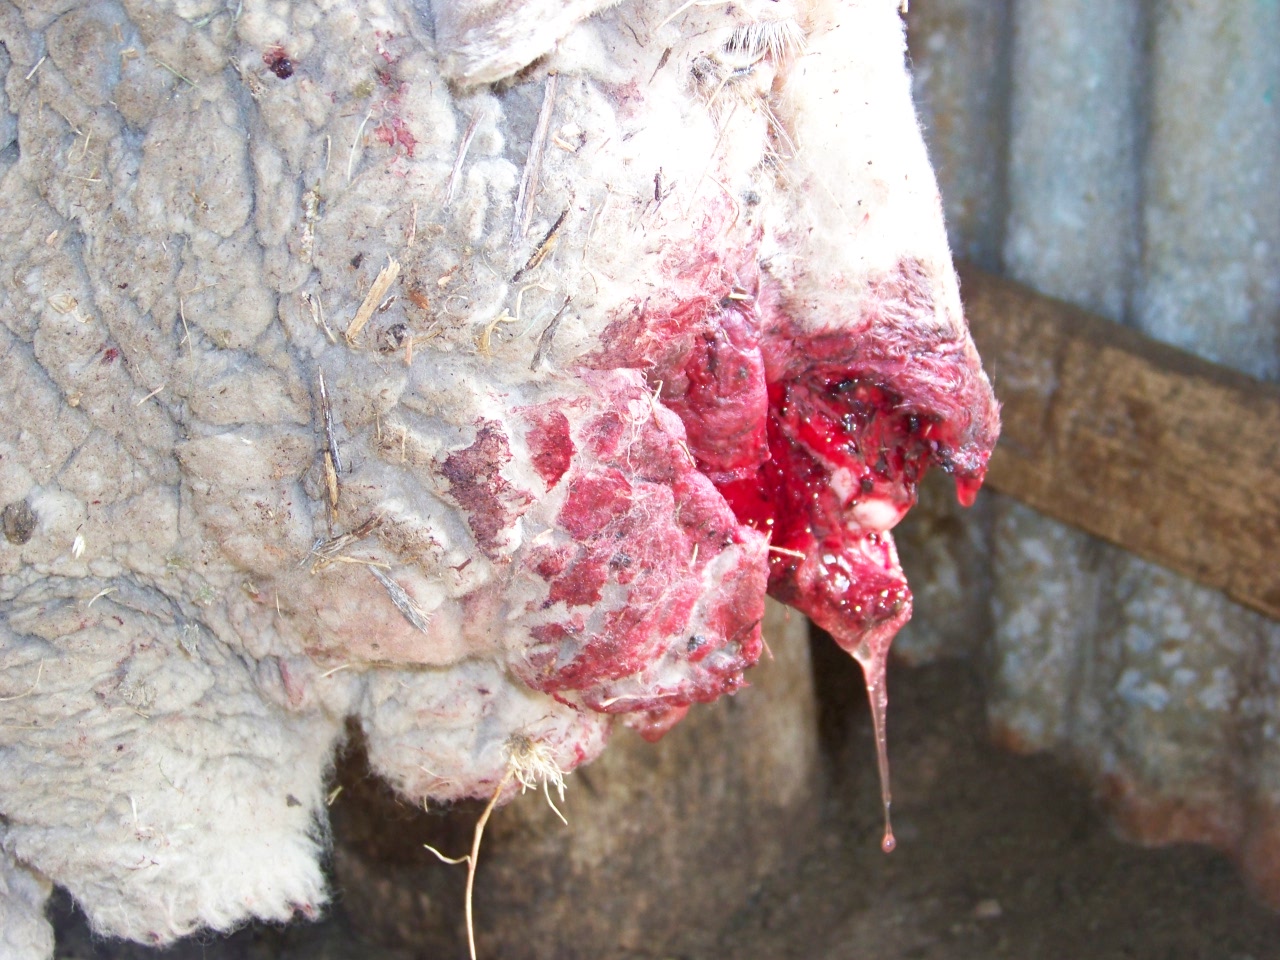 sheep face showing exposed teeth